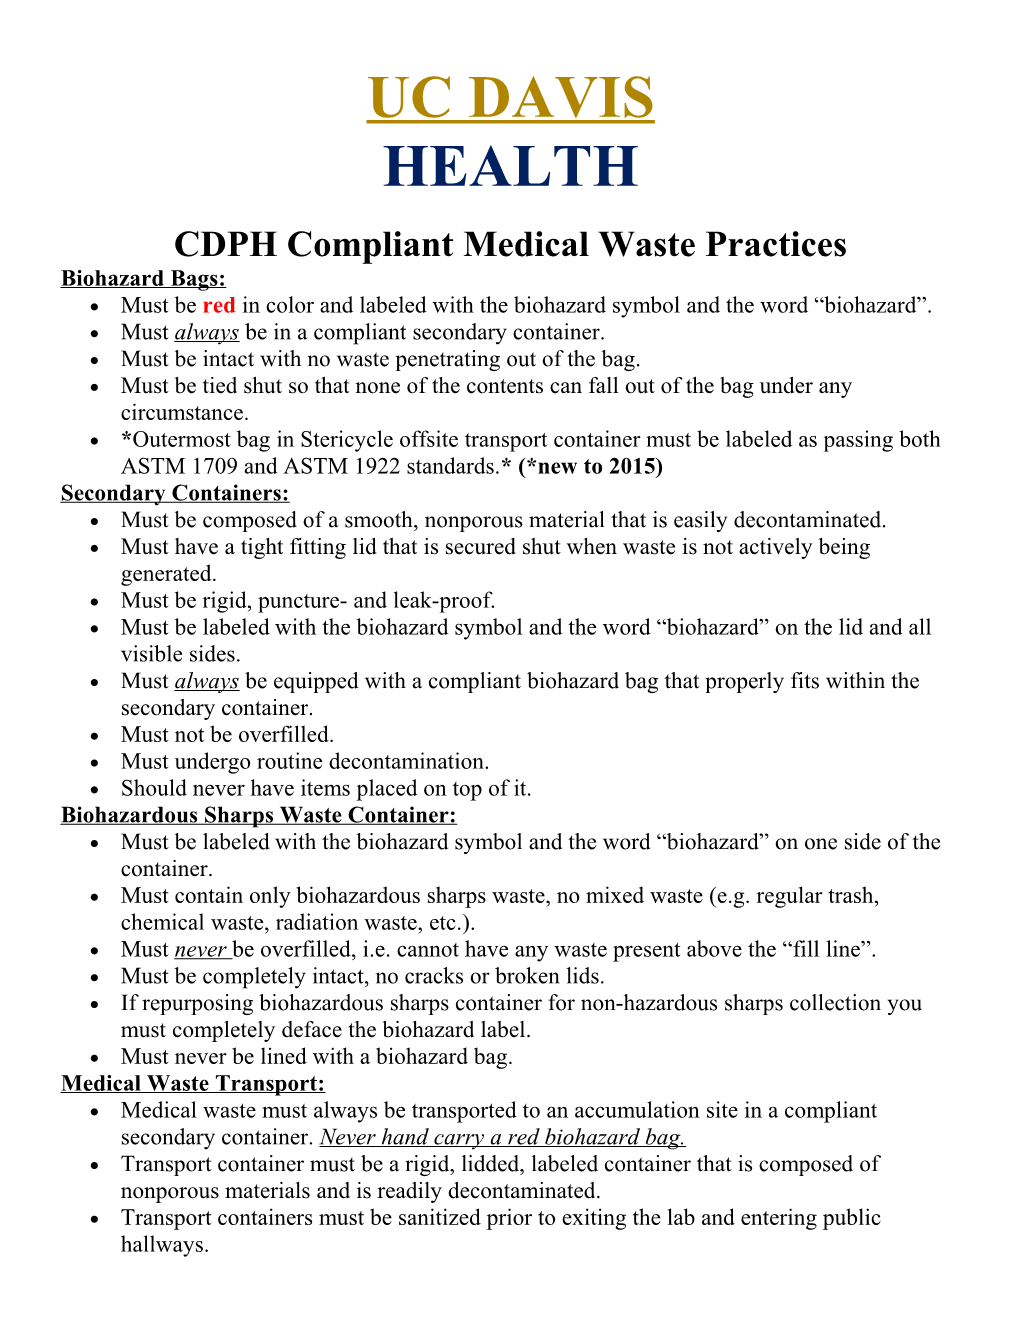 CDPH Compliant Medical Waste Practices